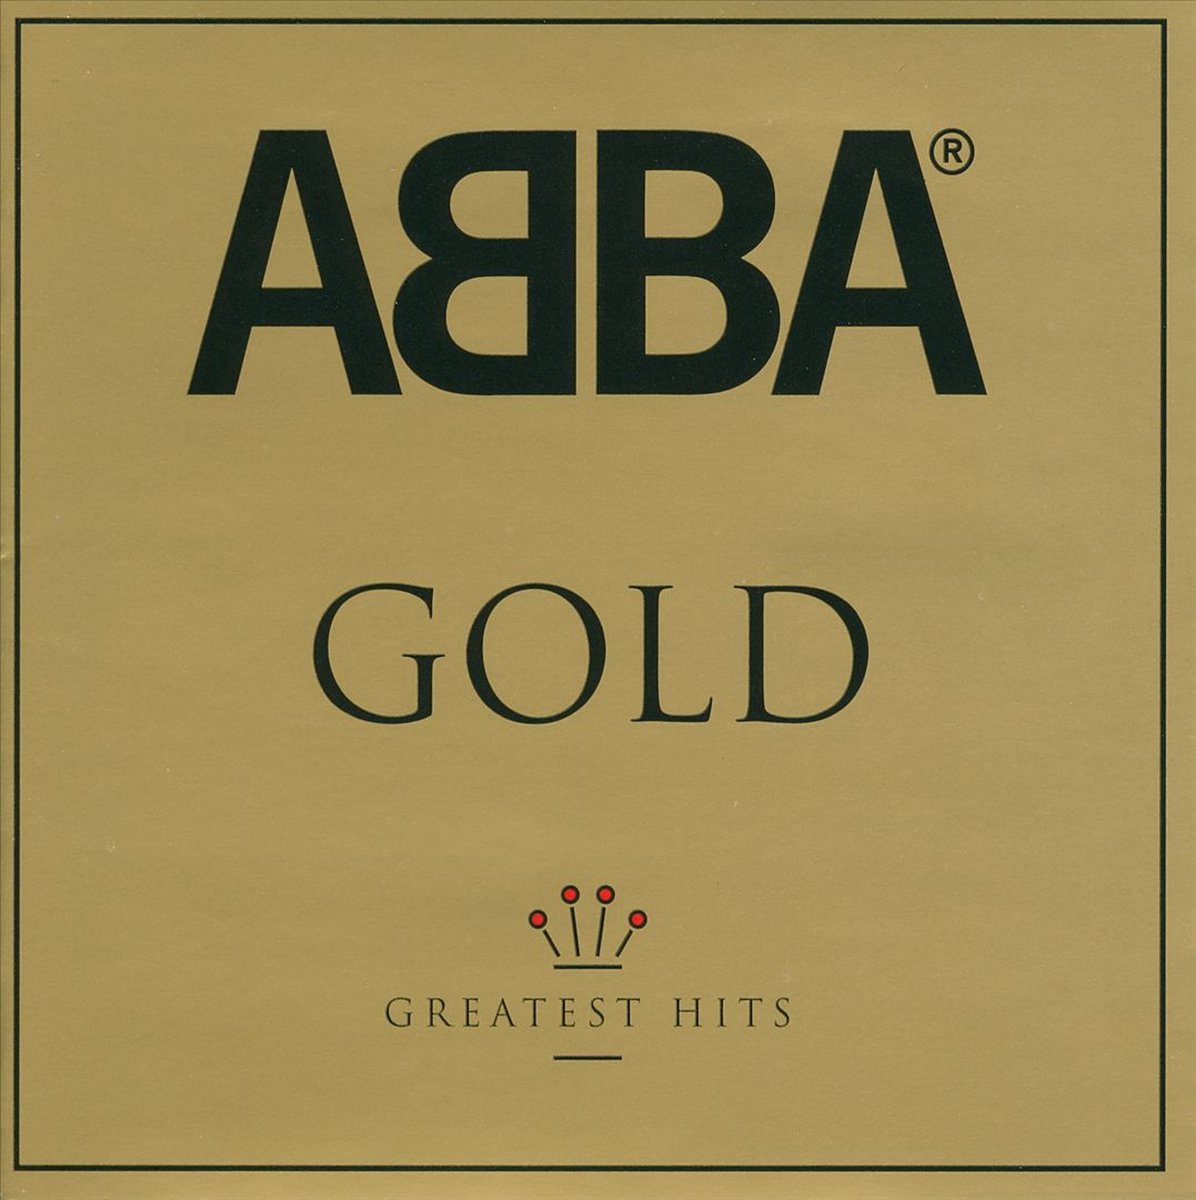 Gold: Greatest Hits (CD) - ABBA